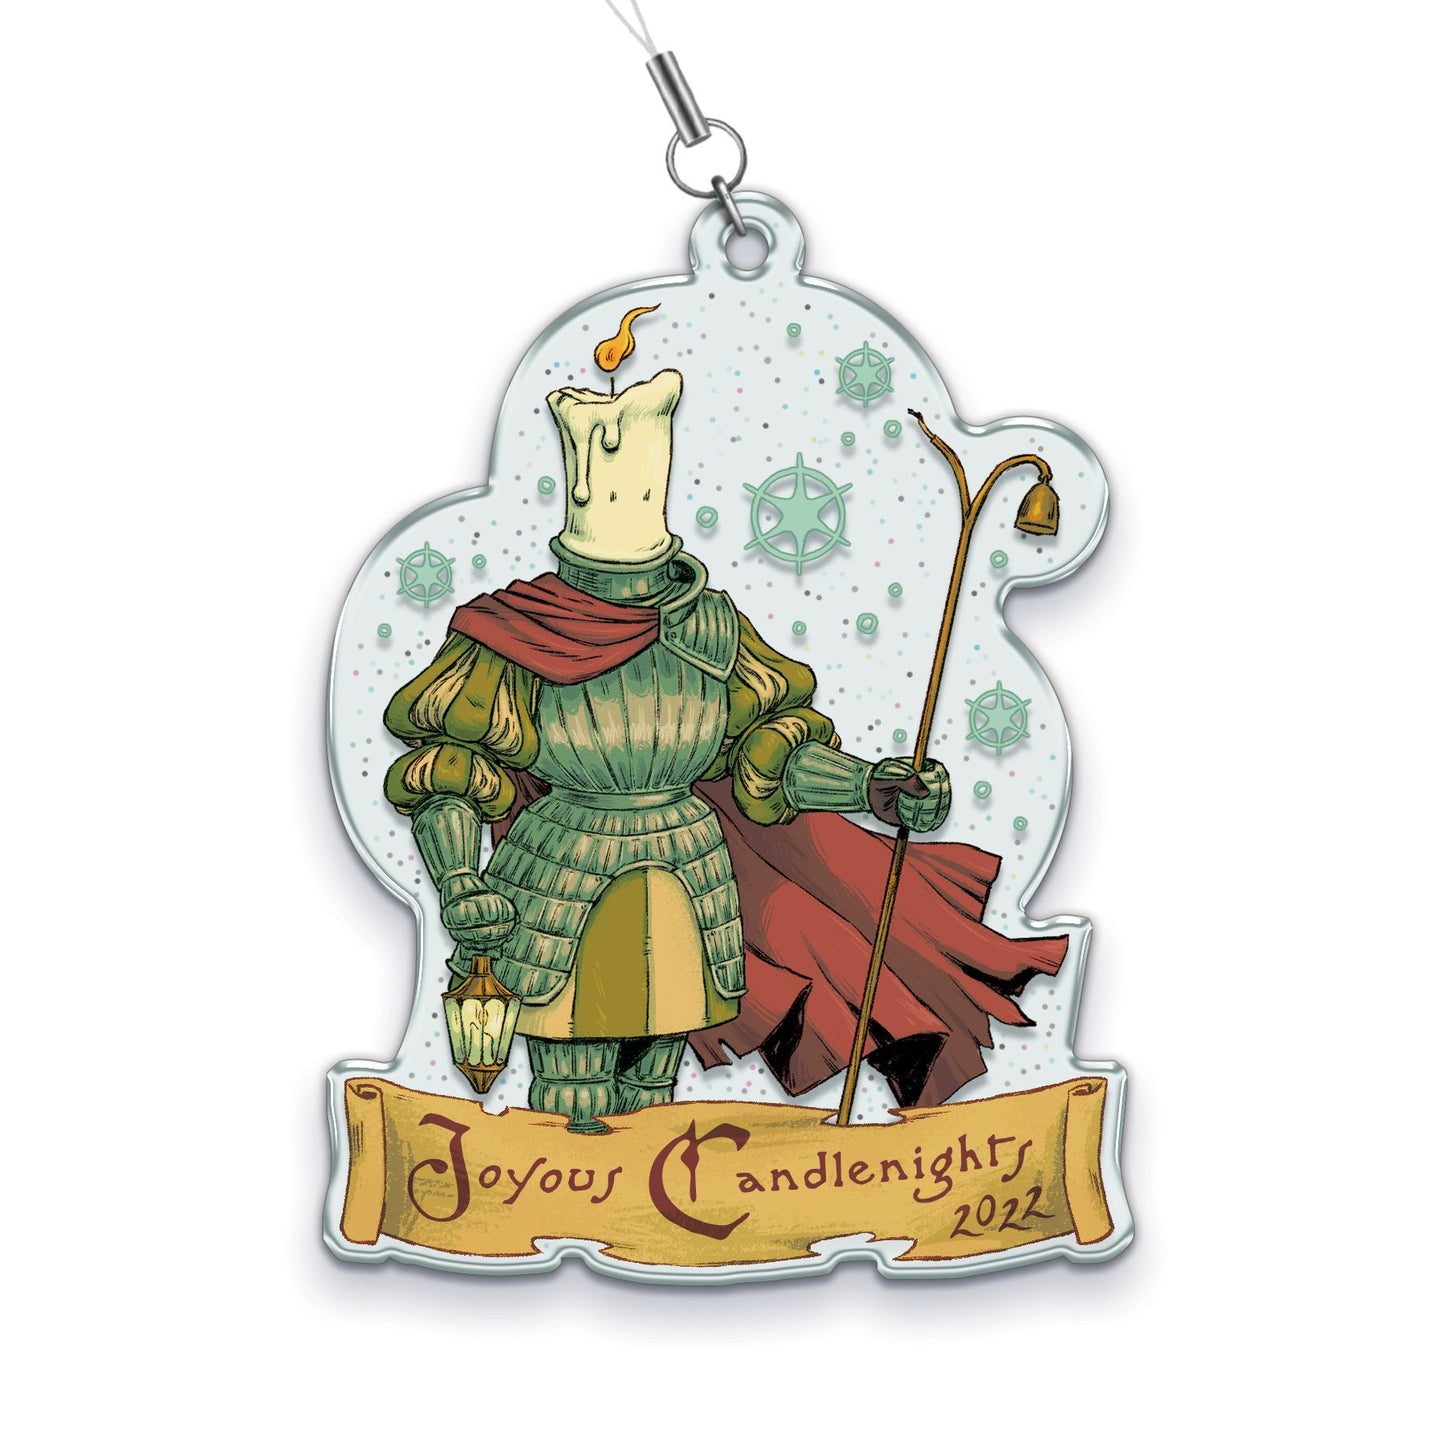 An acrylic ornament with an illustration of a burning candle wearing armor and holding a golden staff. It is surrounded by snowflakes and has a red cape. Below, it says, “Joyous Candlenights 2022”.